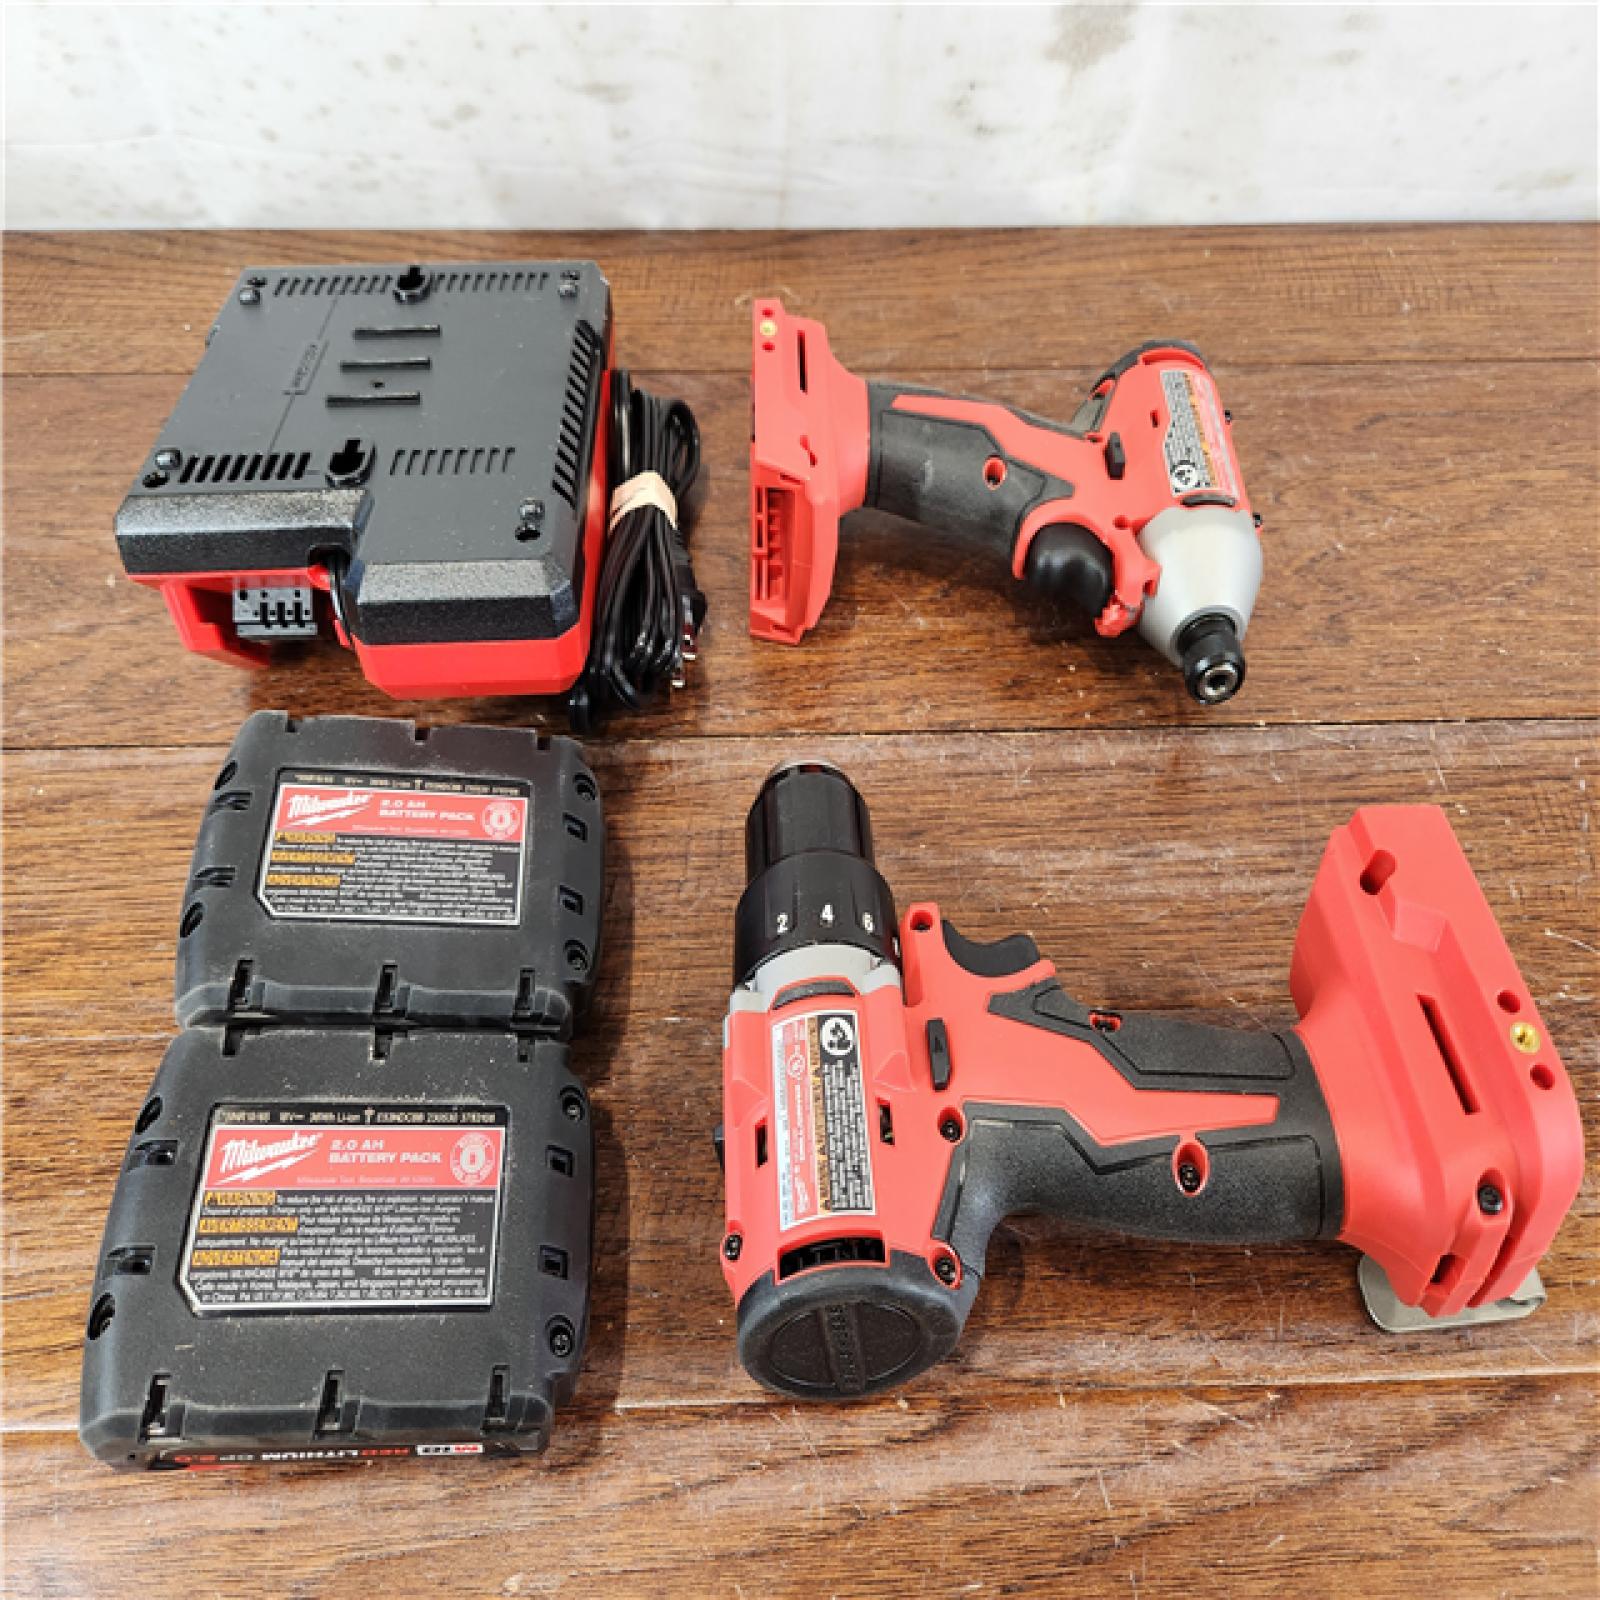 AS-IS Milwaukee M18 Lithium-Ion Brushless Cordless (2-Tool) Compact Drill/Impact Combo Kit